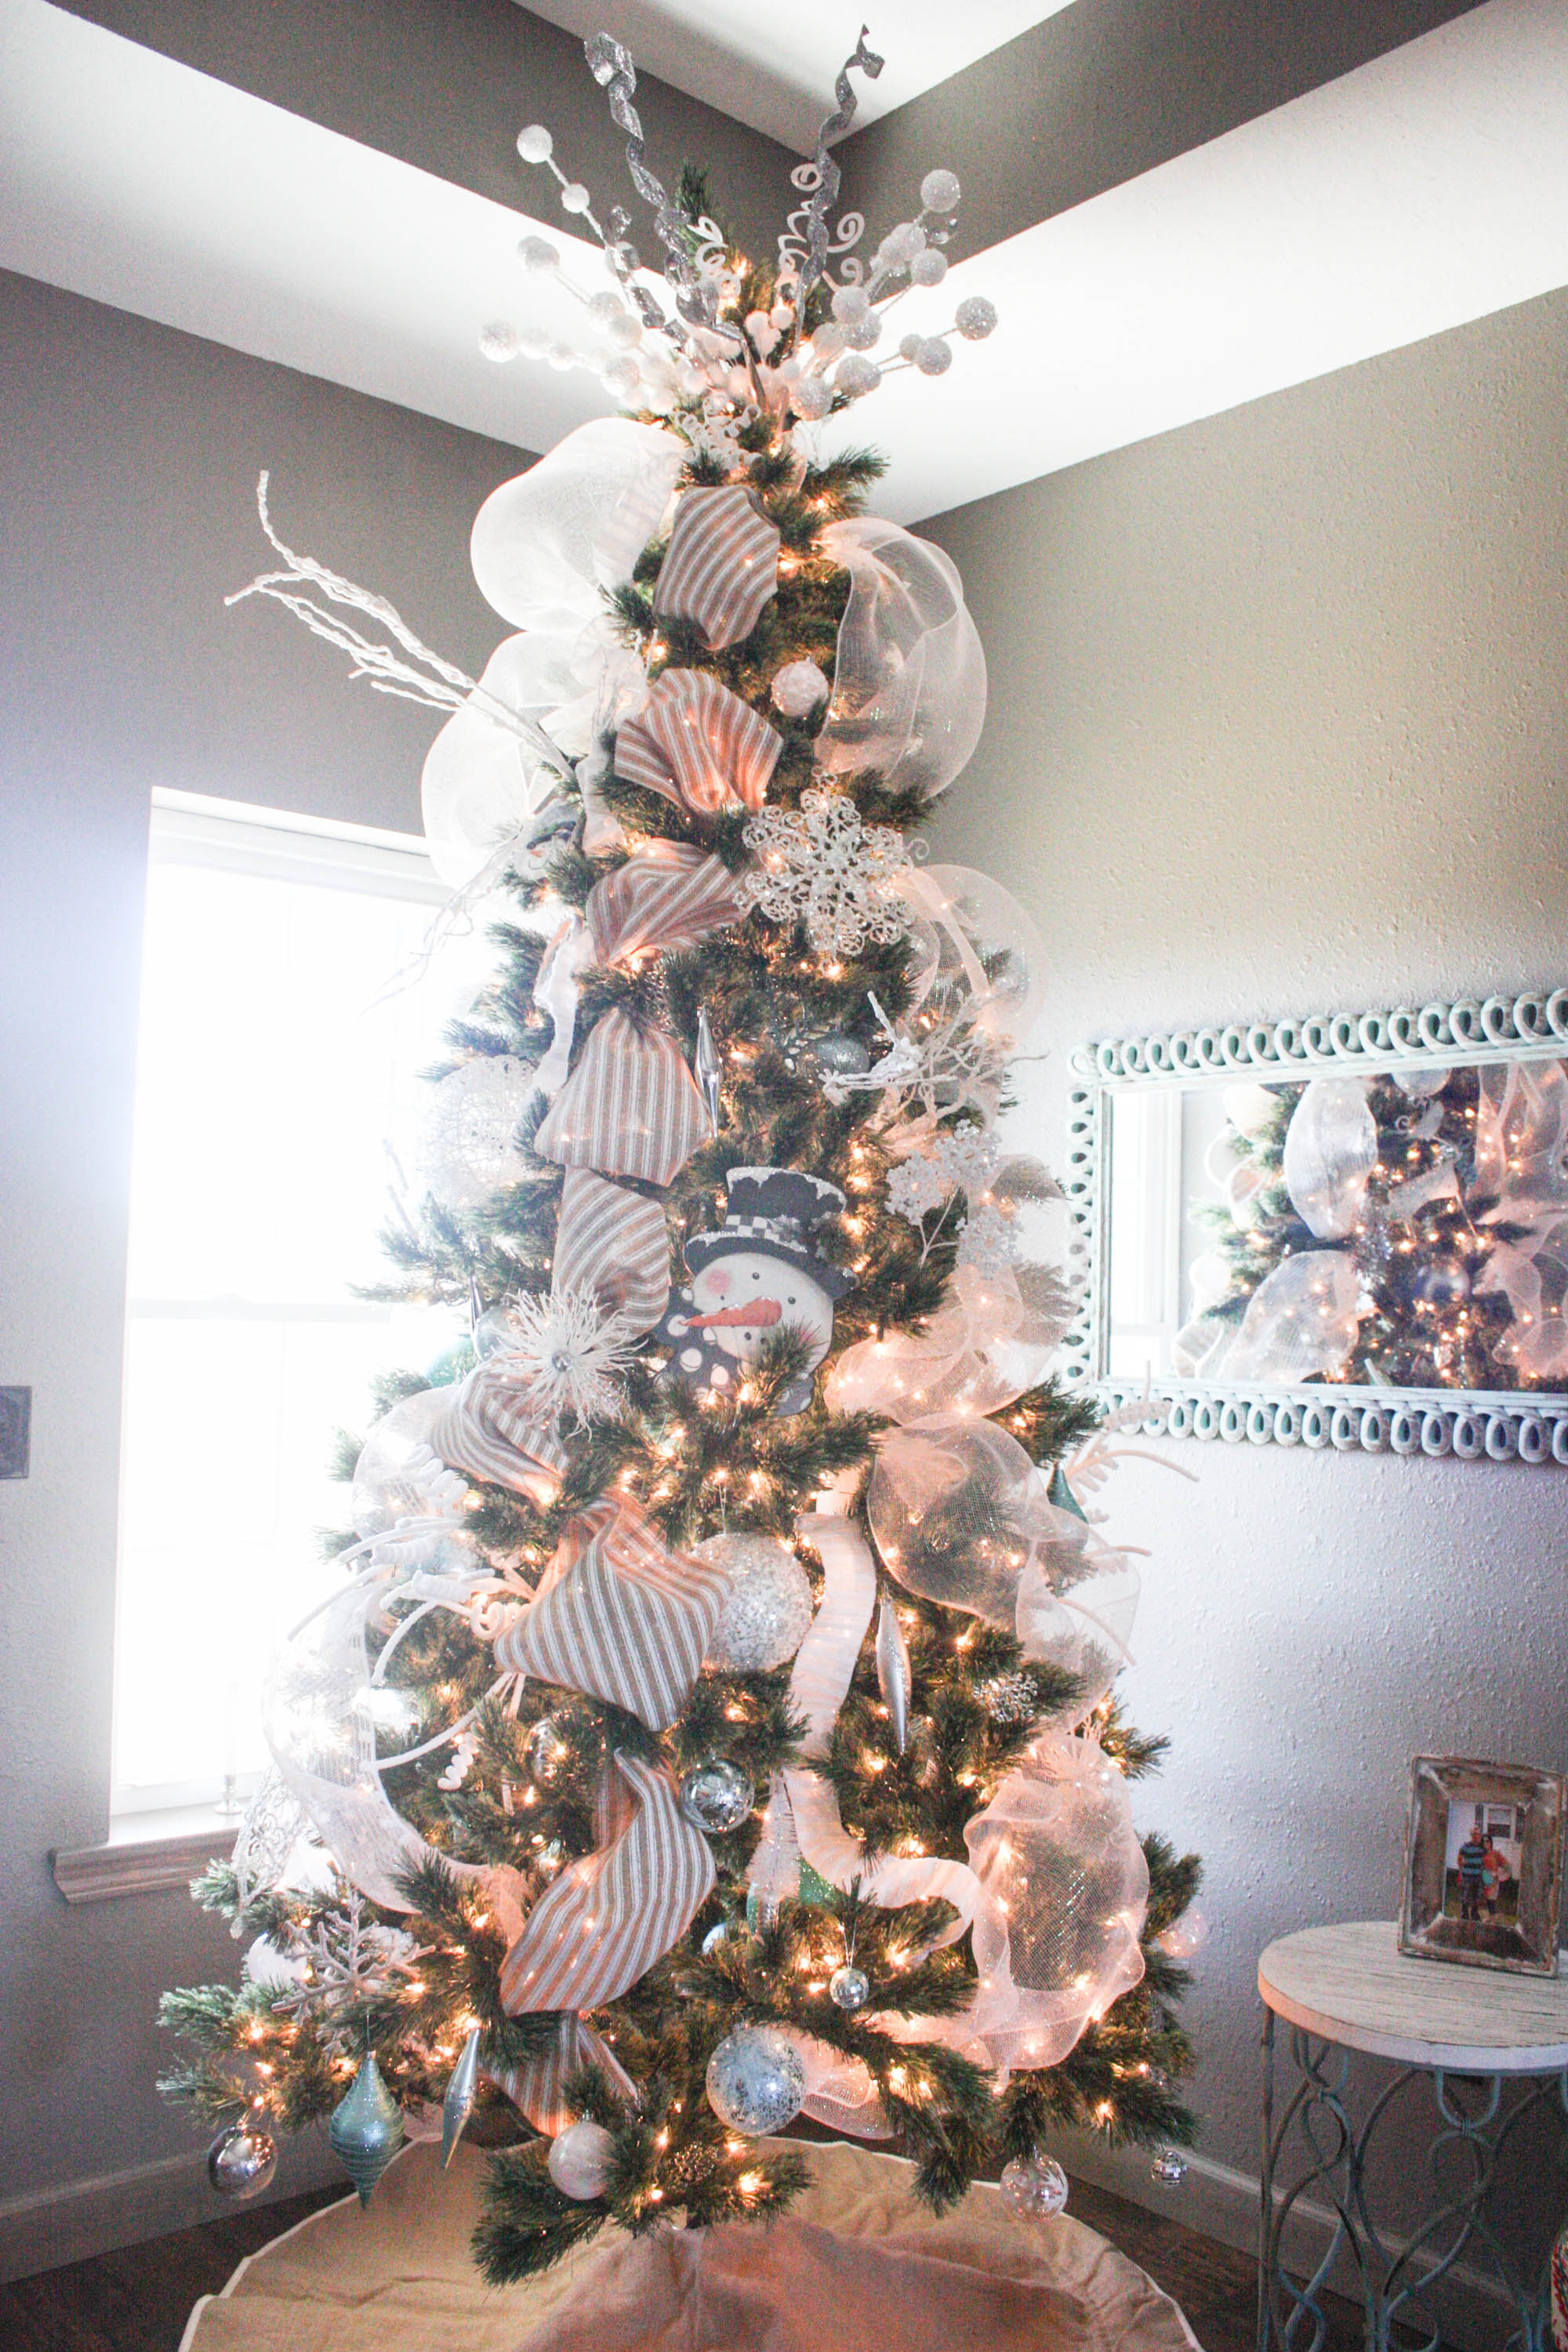 How to Decorate a Christmas Tree from Start to Finish {the EASY way